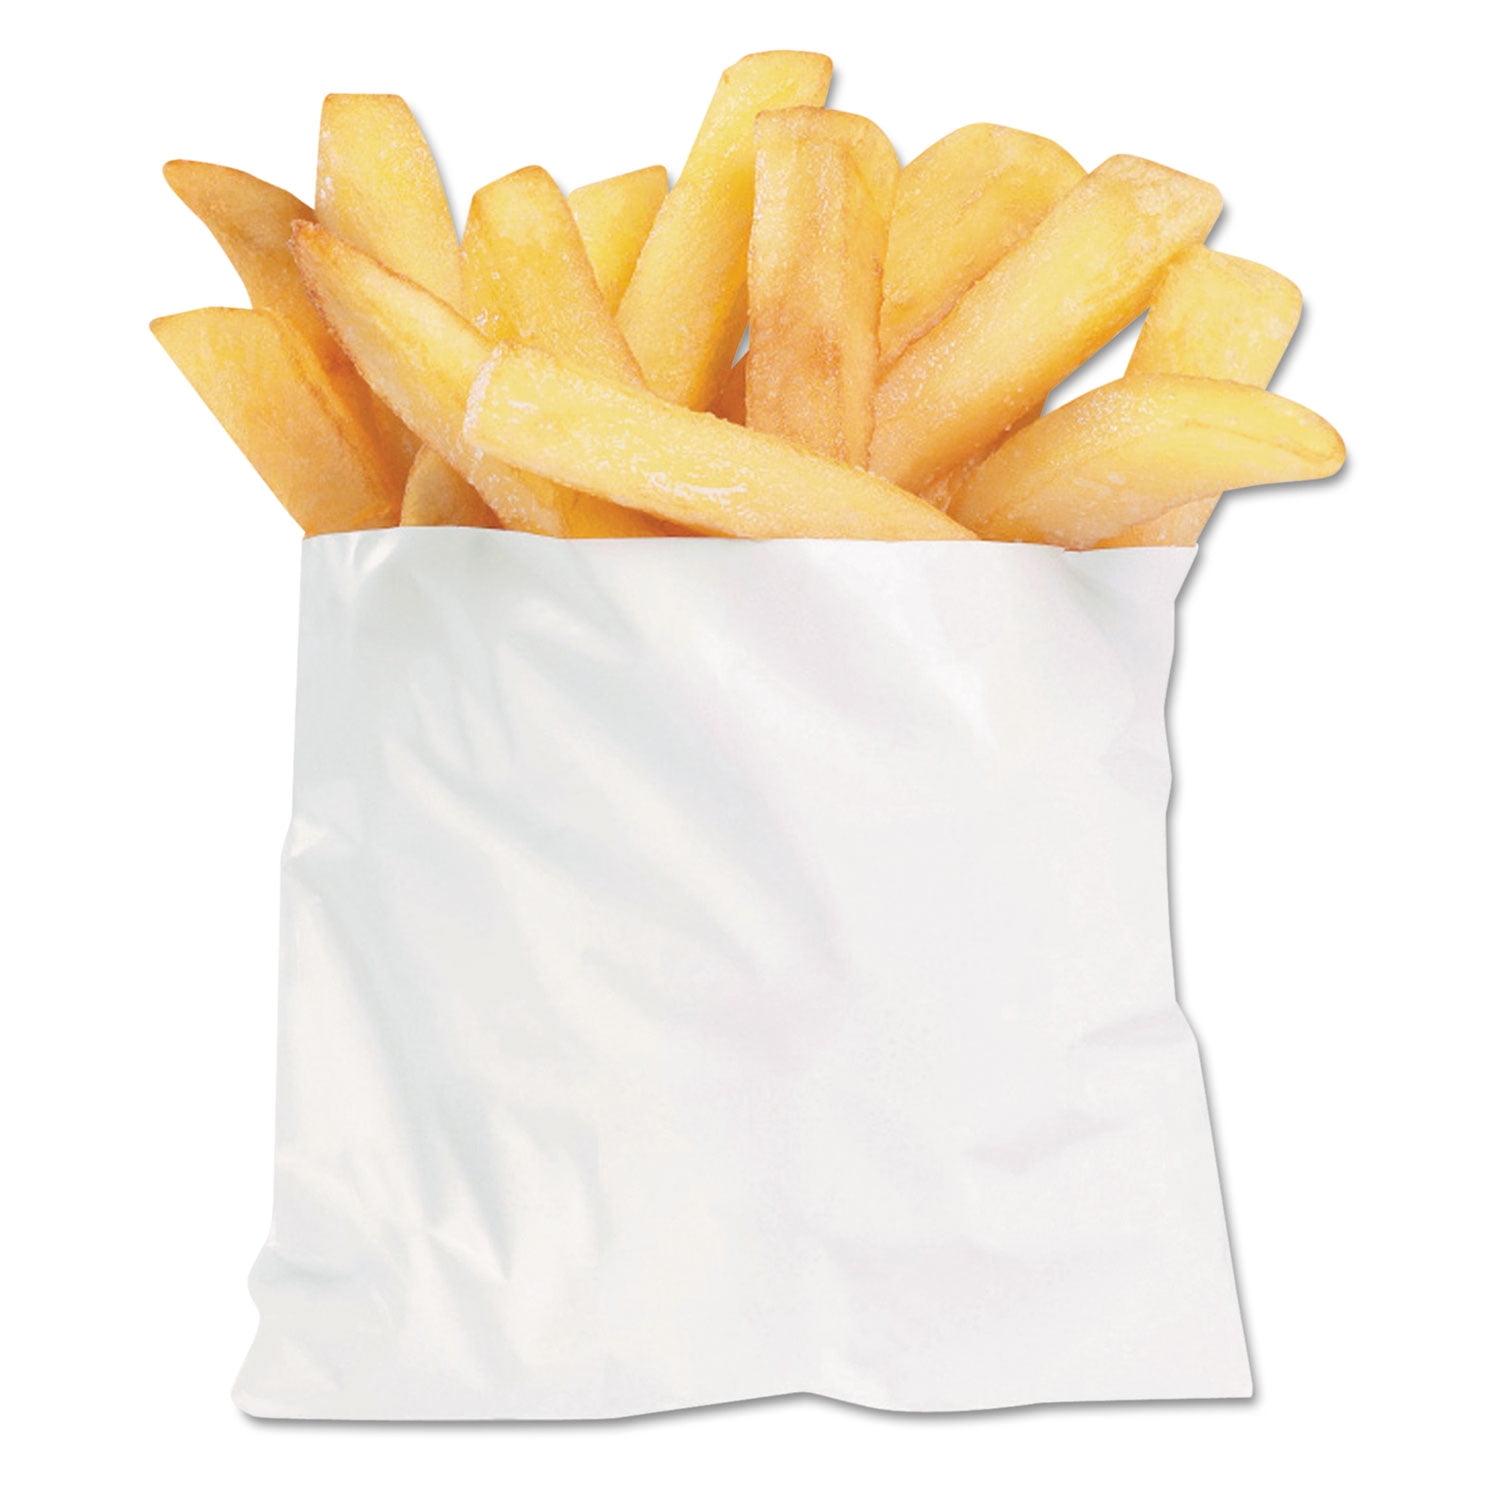 MT Products Kraft French Fry Bags - 4.5 x 4.5 Disposable Grease-Resistant  Small Paper Bags Great for Chocolate Chip Cookies, Snacks, and Fried Foods